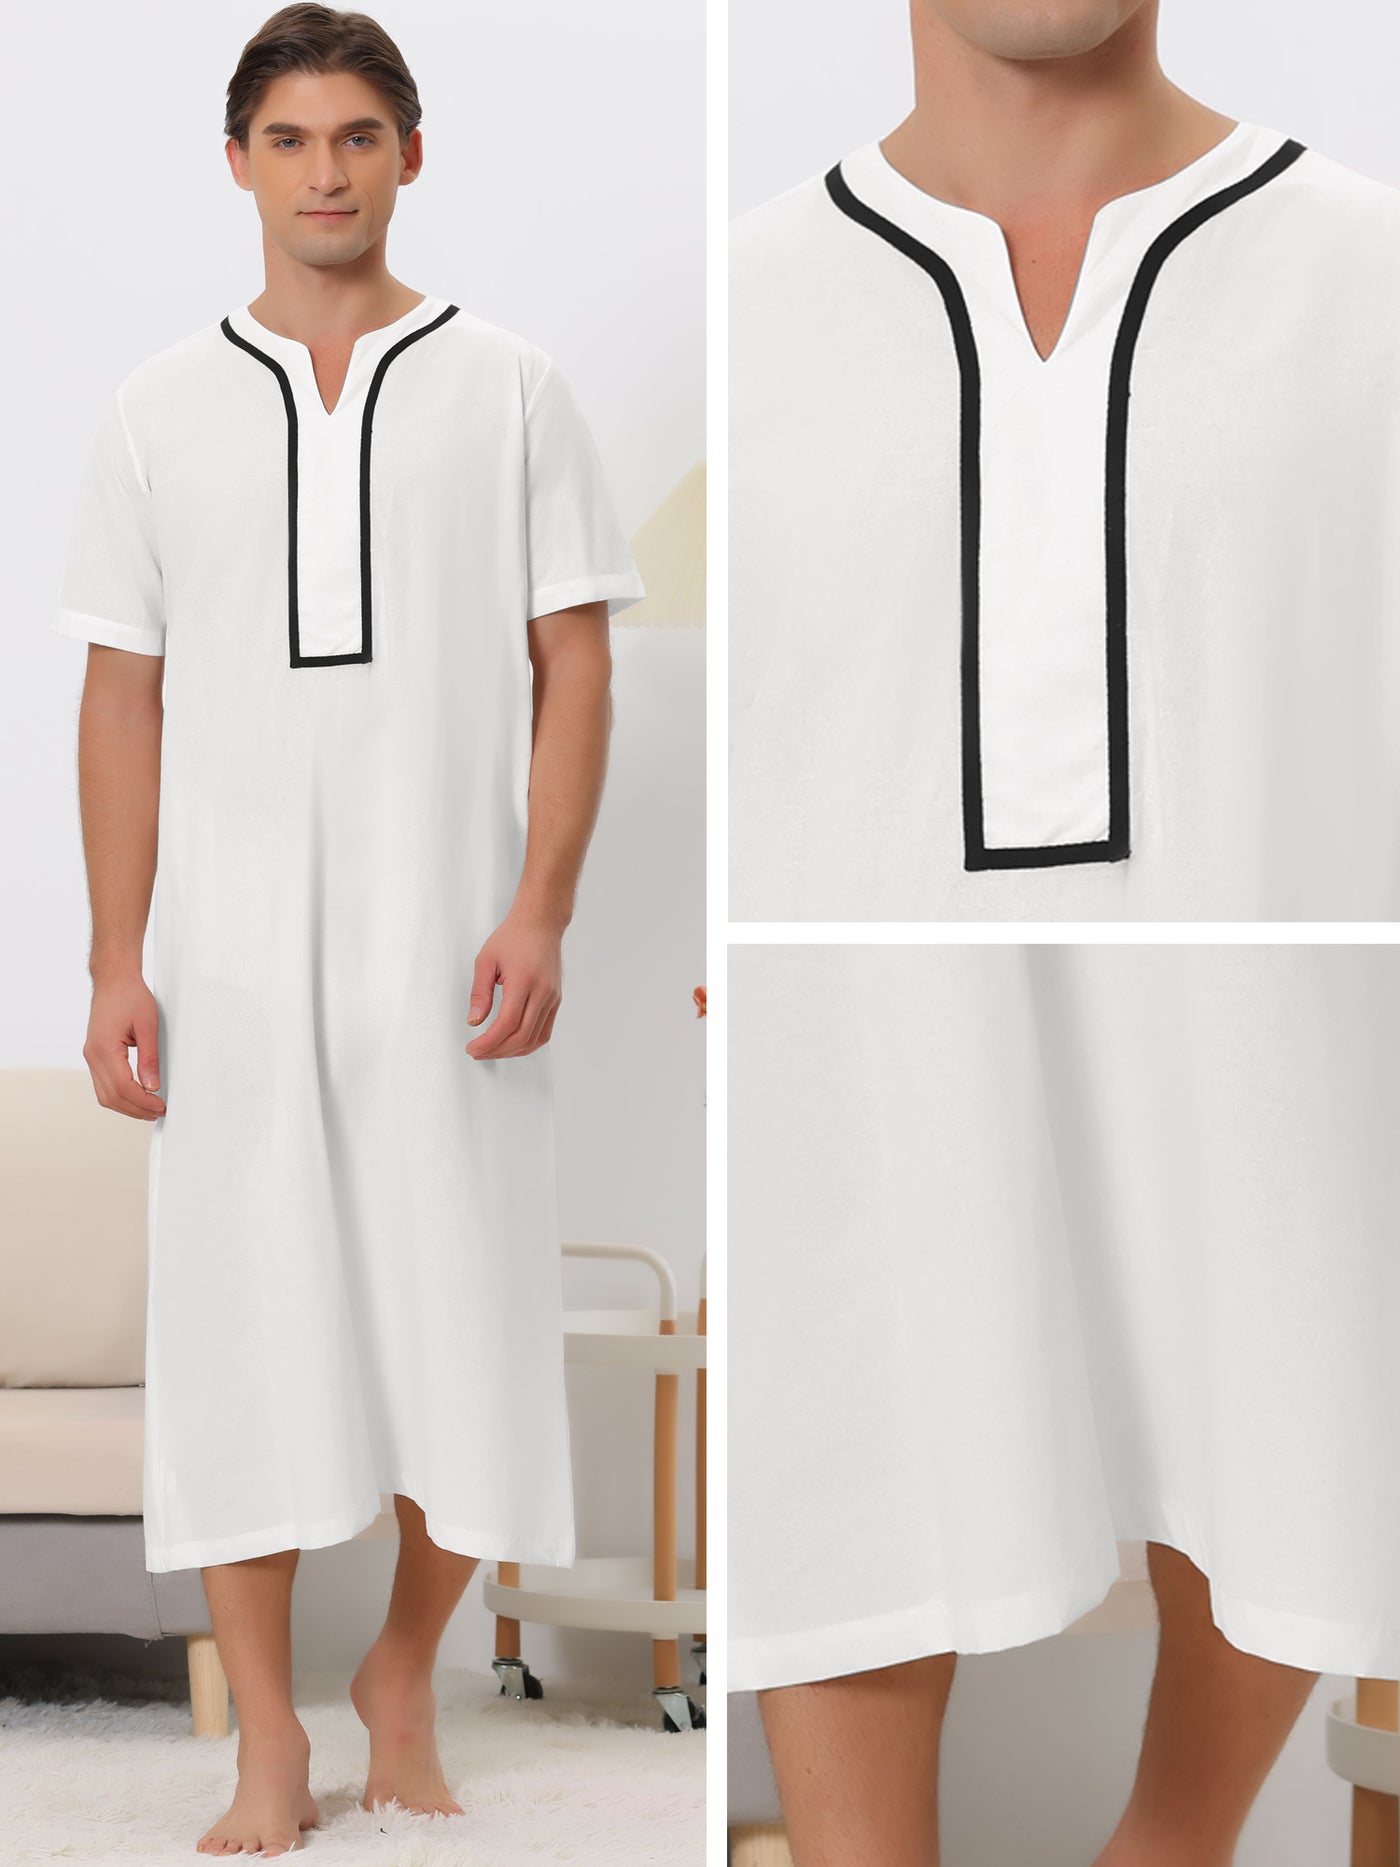 Bublédon Nightshirts for Men's Loose Fit Short Sleeves Color Block Sleepshirts Nightgown